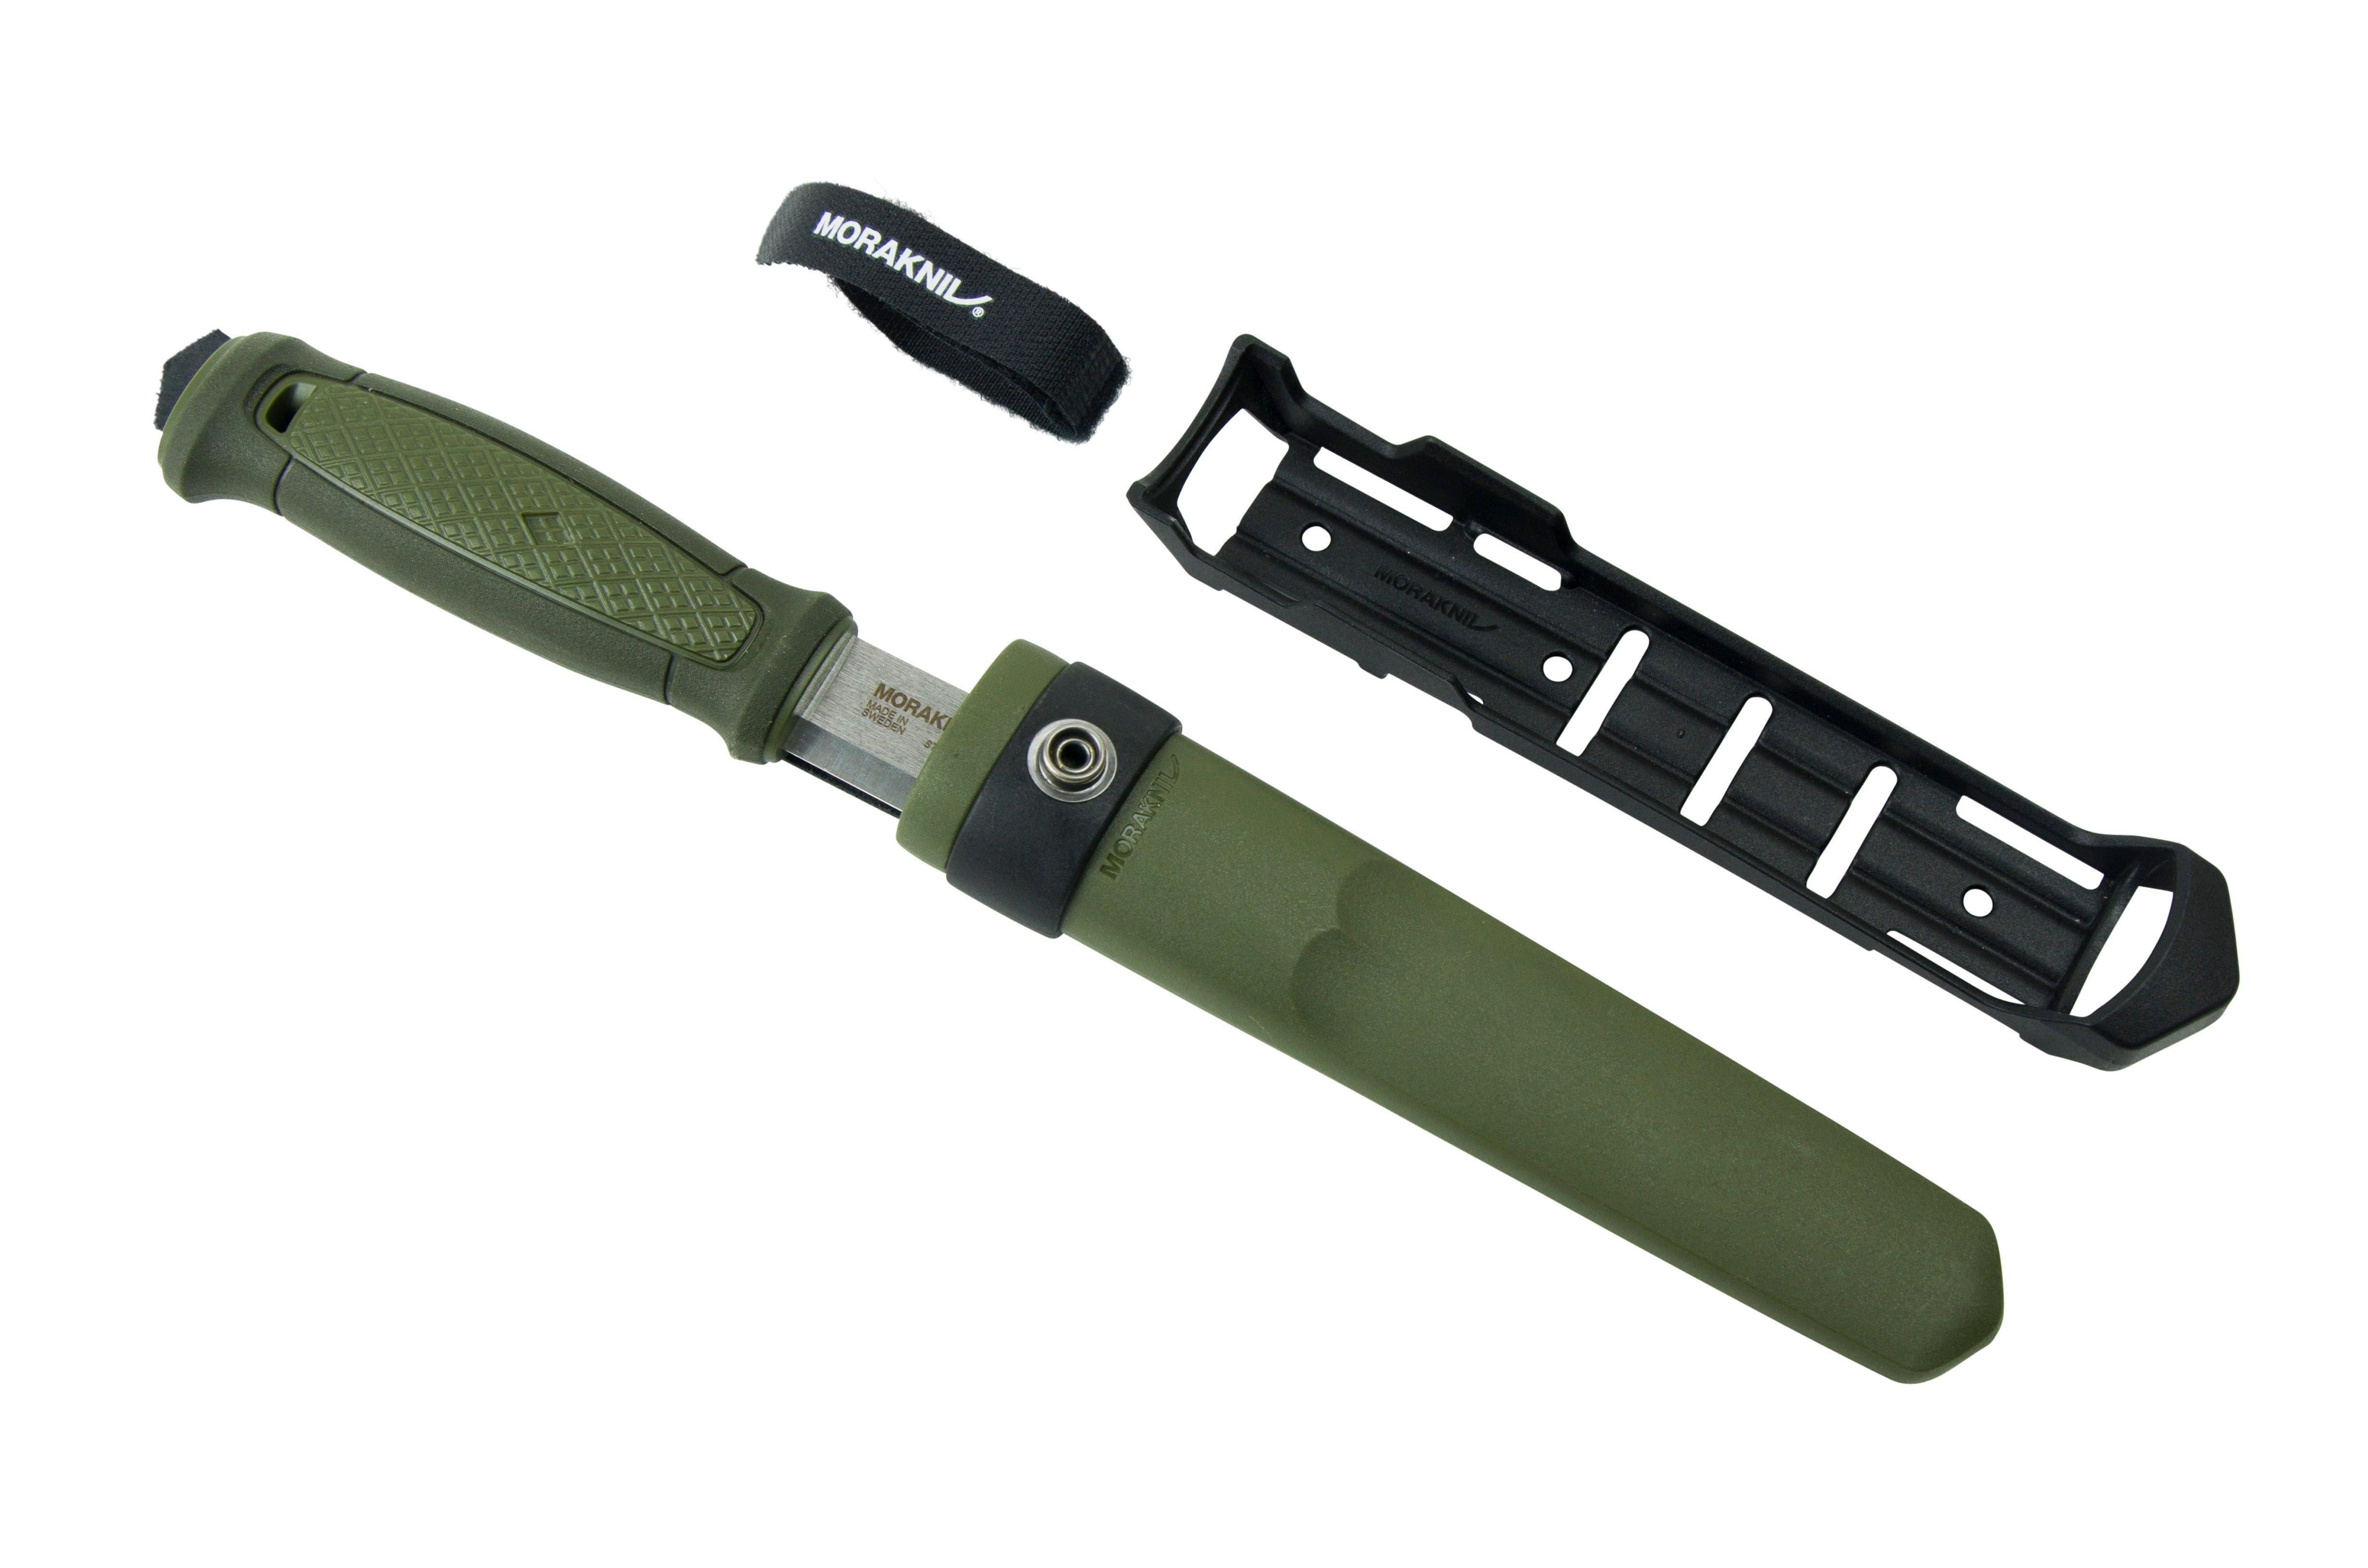 Morakniv�� Kansbol Stainless Knife with Plastic MOLLE Sheath - Trusted Gear Company LLC